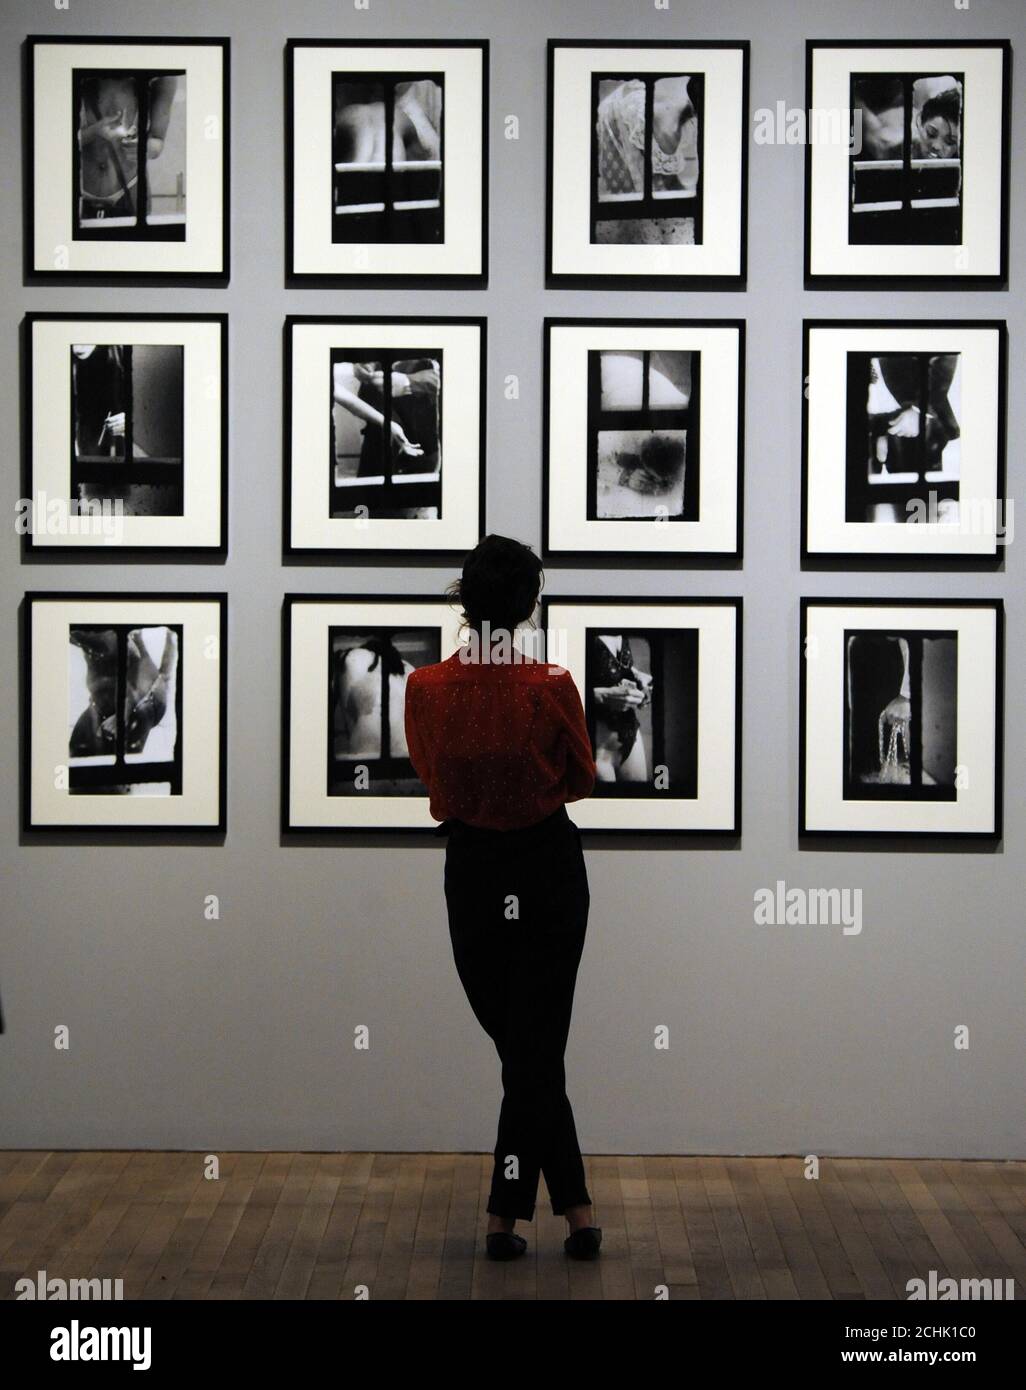 A visitor to the Tate Modern in London today views the exhibition Exposed: Voyeurism, Surveillance and The Camera which is due to open to the public on 28 May. Stock Photo